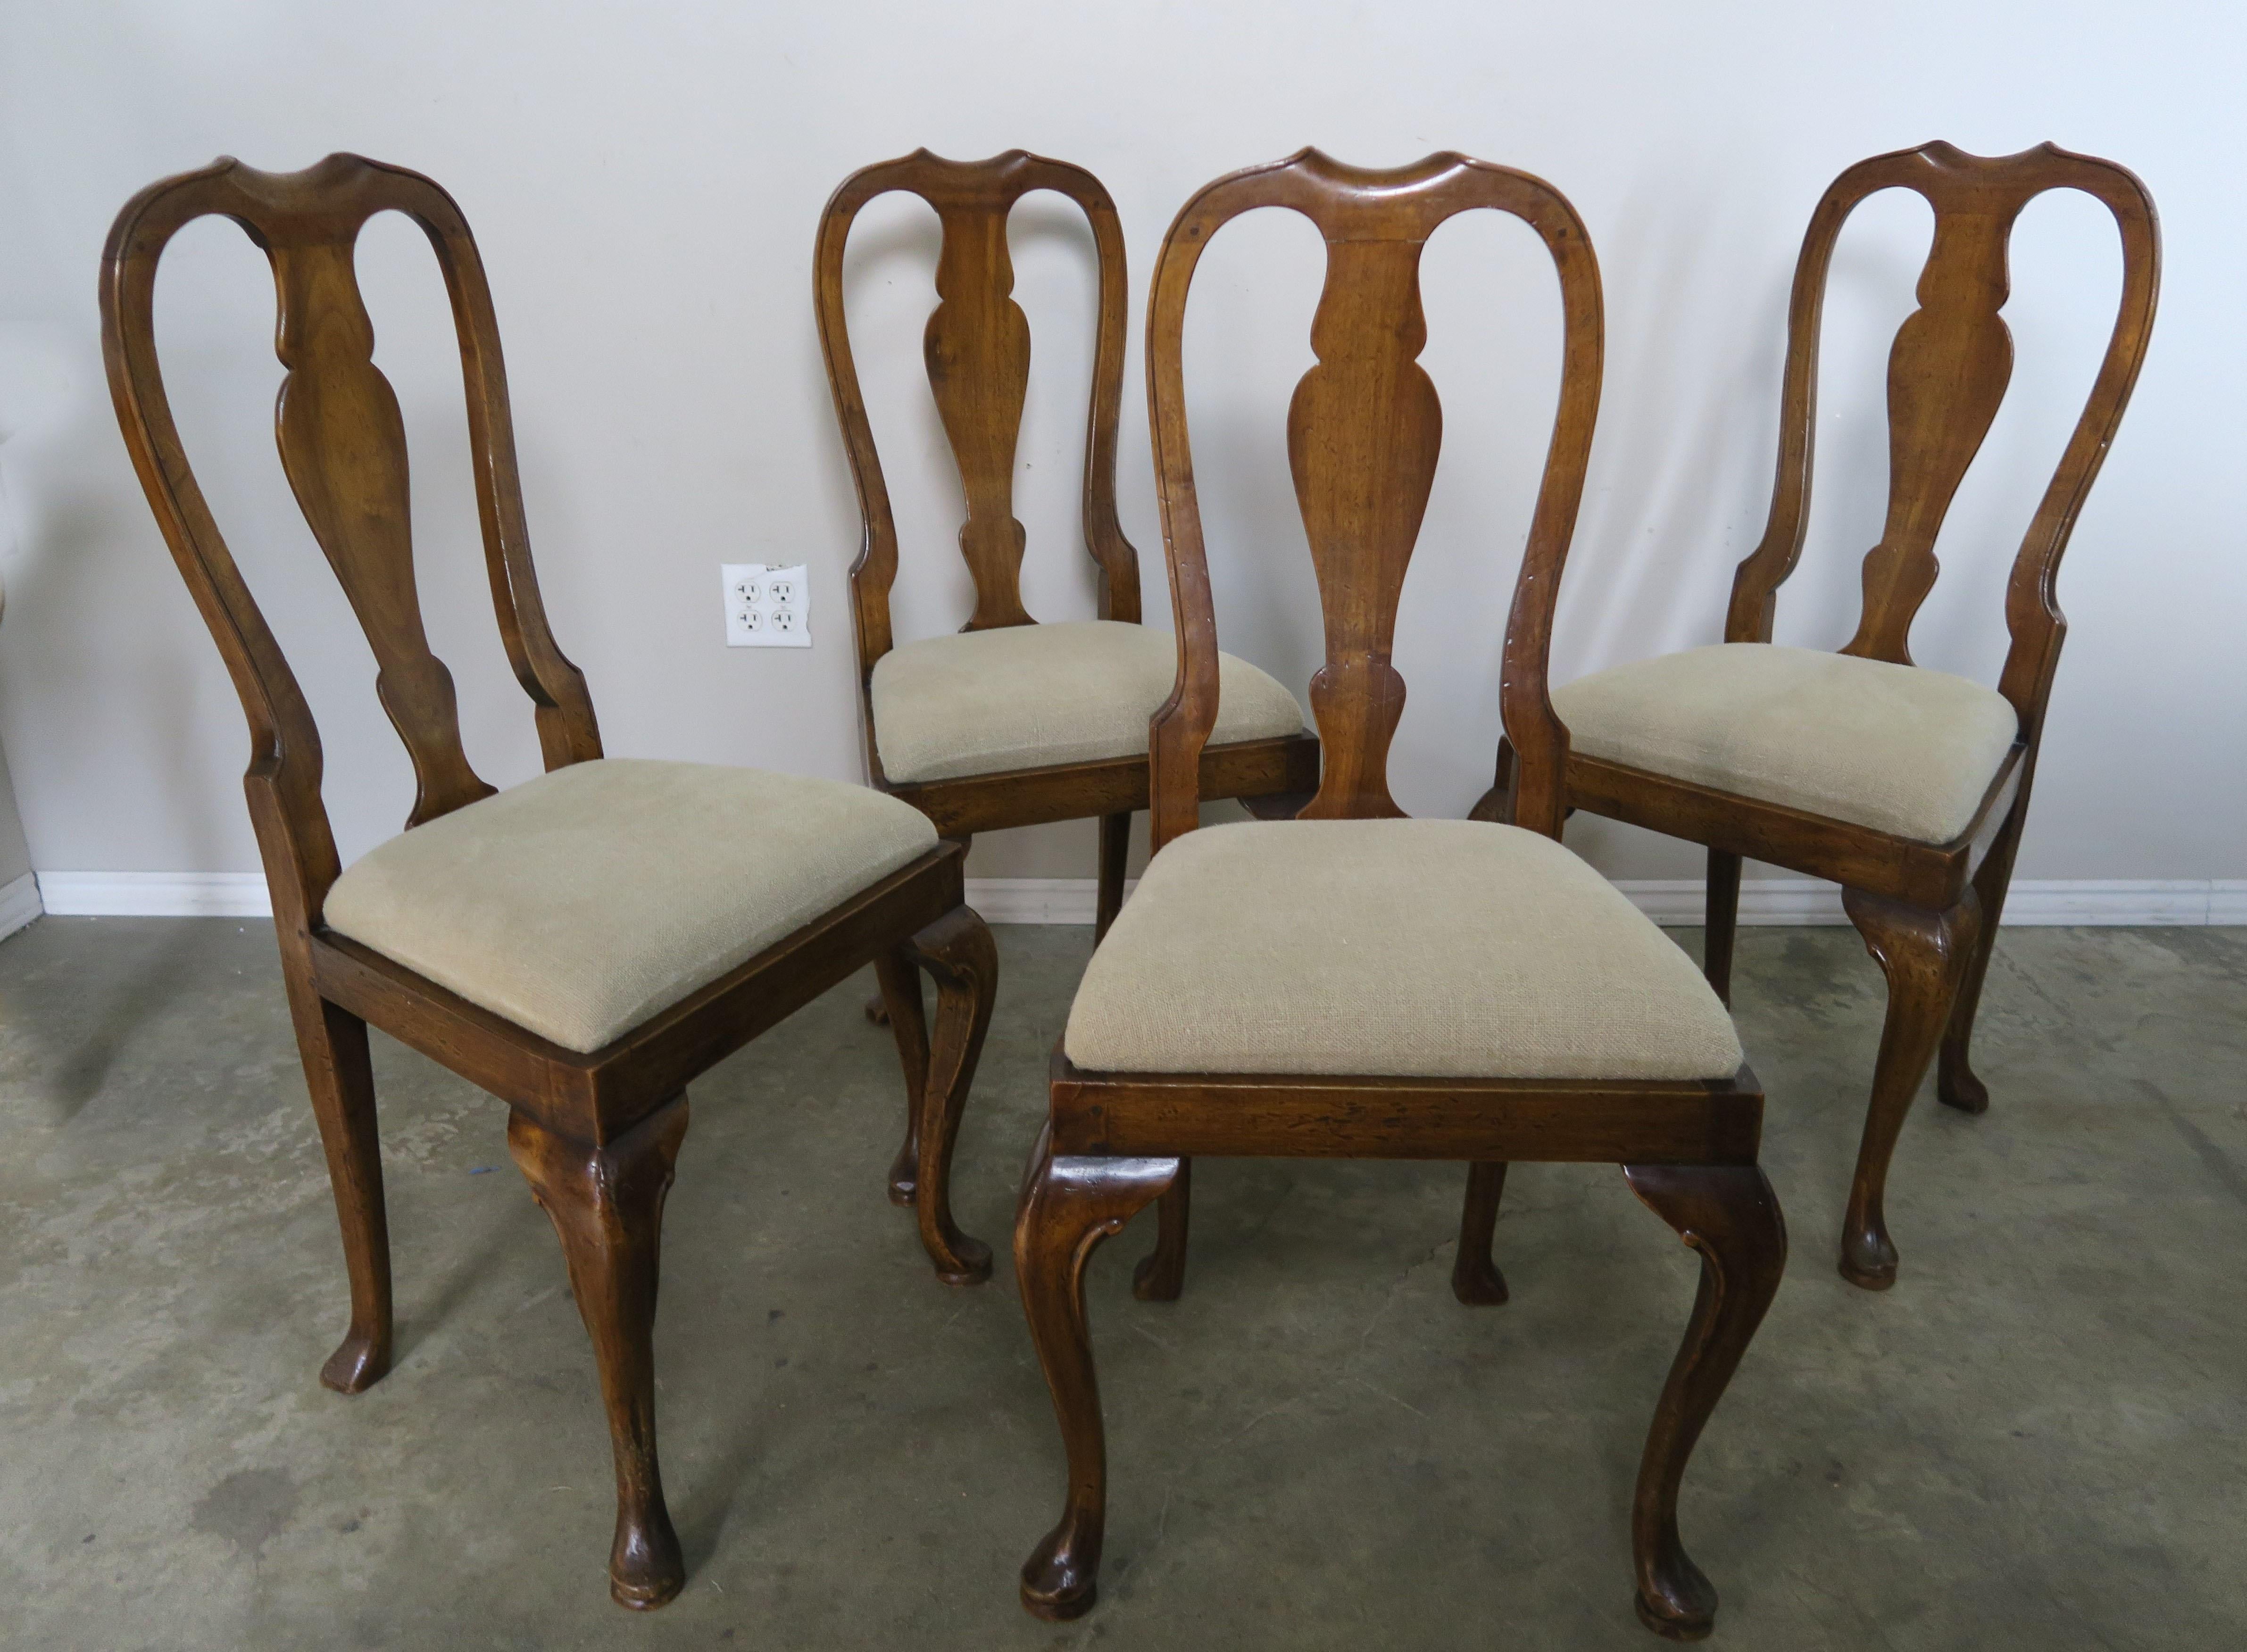 Set of 1920s four English Queen Anne style side chairs that are newly upholstered in Belgium linen upholstery.
Measure: S.H. 20.